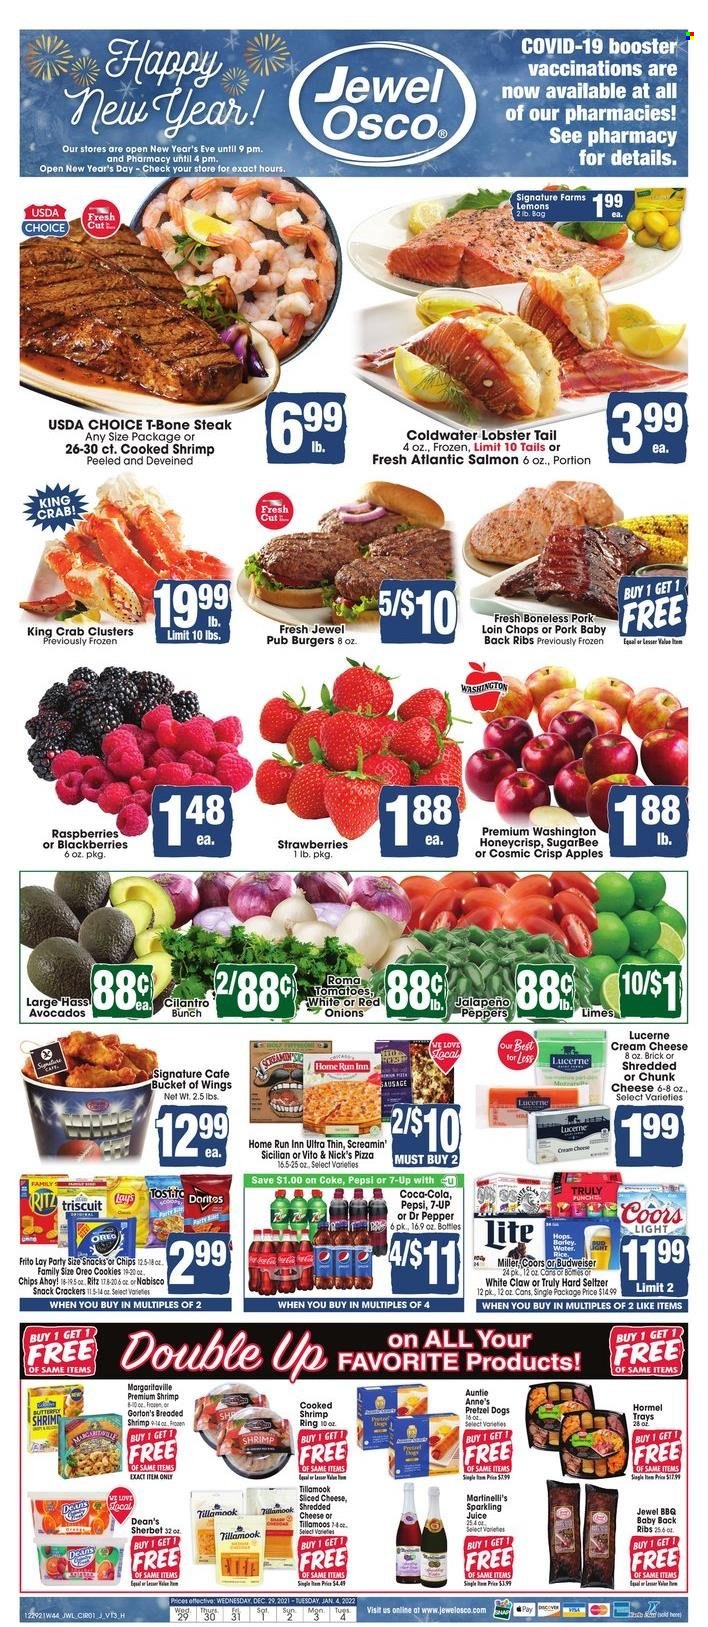 thumbnail - Jewel Osco Flyer - 12/29/2021 - 01/04/2022 - Sales products - pretzels, red onions, onion, peppers, jalapeño, apples, avocado, blackberries, limes, strawberries, lobster, salmon, king crab, crab, lobster tail, shrimps, Gorton's, pizza, hamburger, Hormel, shredded cheese, sliced cheese, chunk cheese, Oreo, sherbet, Screamin' Sicilian, cookies, crackers, Chips Ahoy!, RITZ, Coca-Cola, Pepsi, juice, Dr. Pepper, 7UP, sparkling juice, White Claw, Hard Seltzer, TRULY, beer, Miller, beef meat, t-bone steak, steak, pork chops, pork loin, pork meat, pork ribs, pork back ribs, Budweiser, Coors, lemons. Page 1.